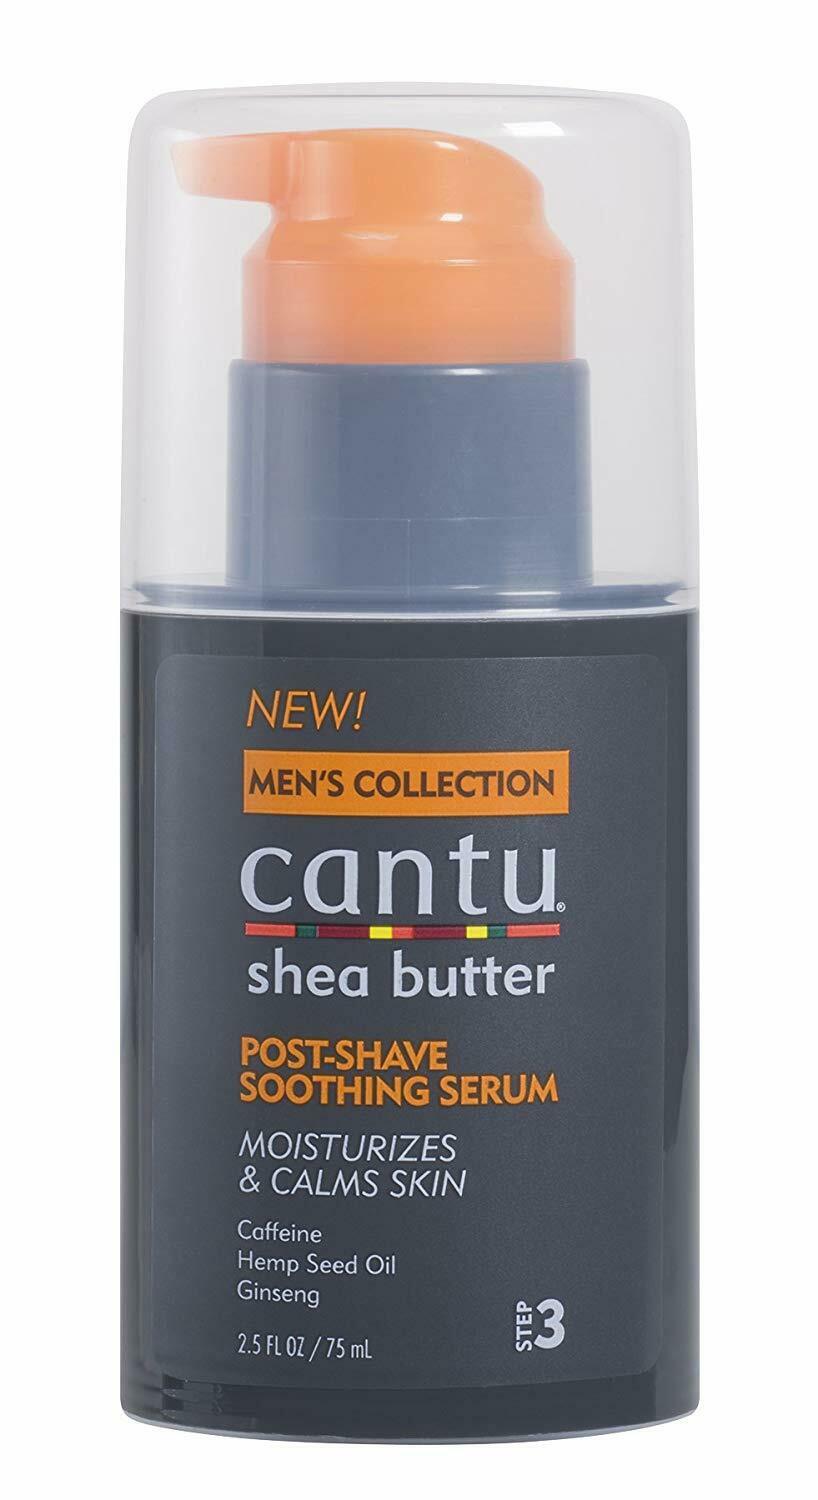 Cantu Shea Butter Men's Collection Post Shave Soothing Serum